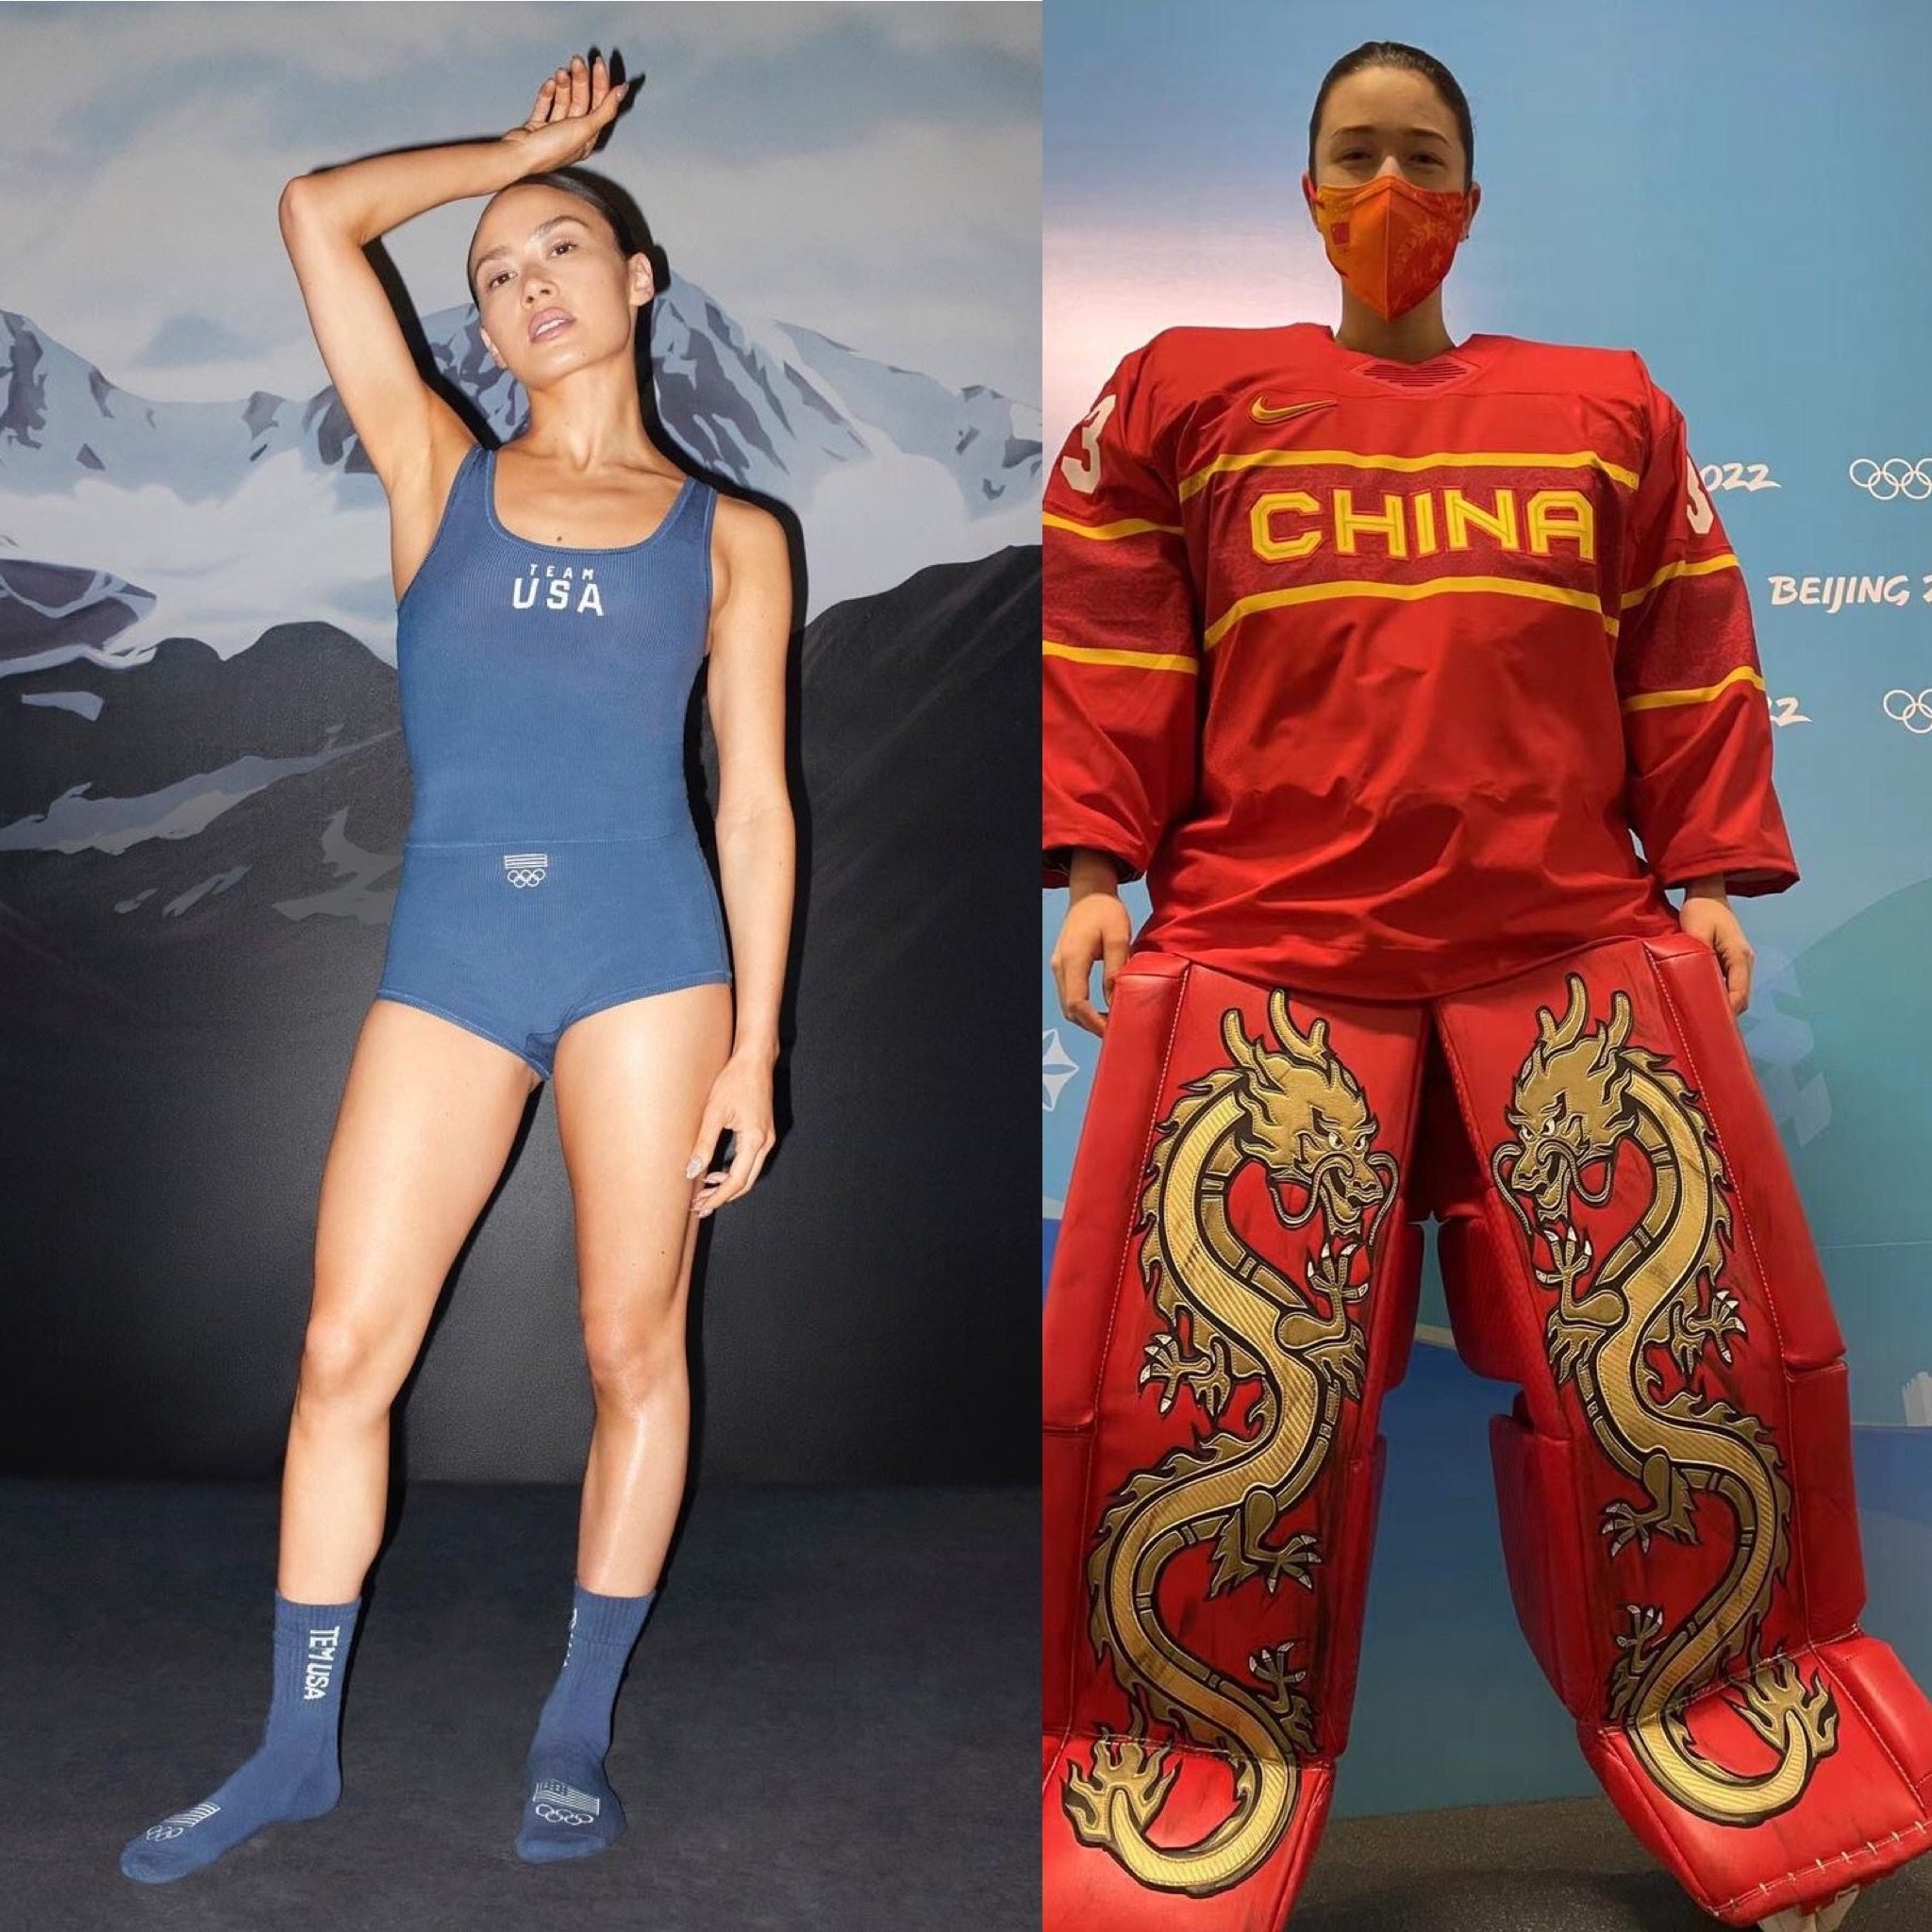 Team USA wearing Skims and China’s ice hockey team outfit for women are just some of the outfits you’ll expect to see during the Winter Games in Beijing.